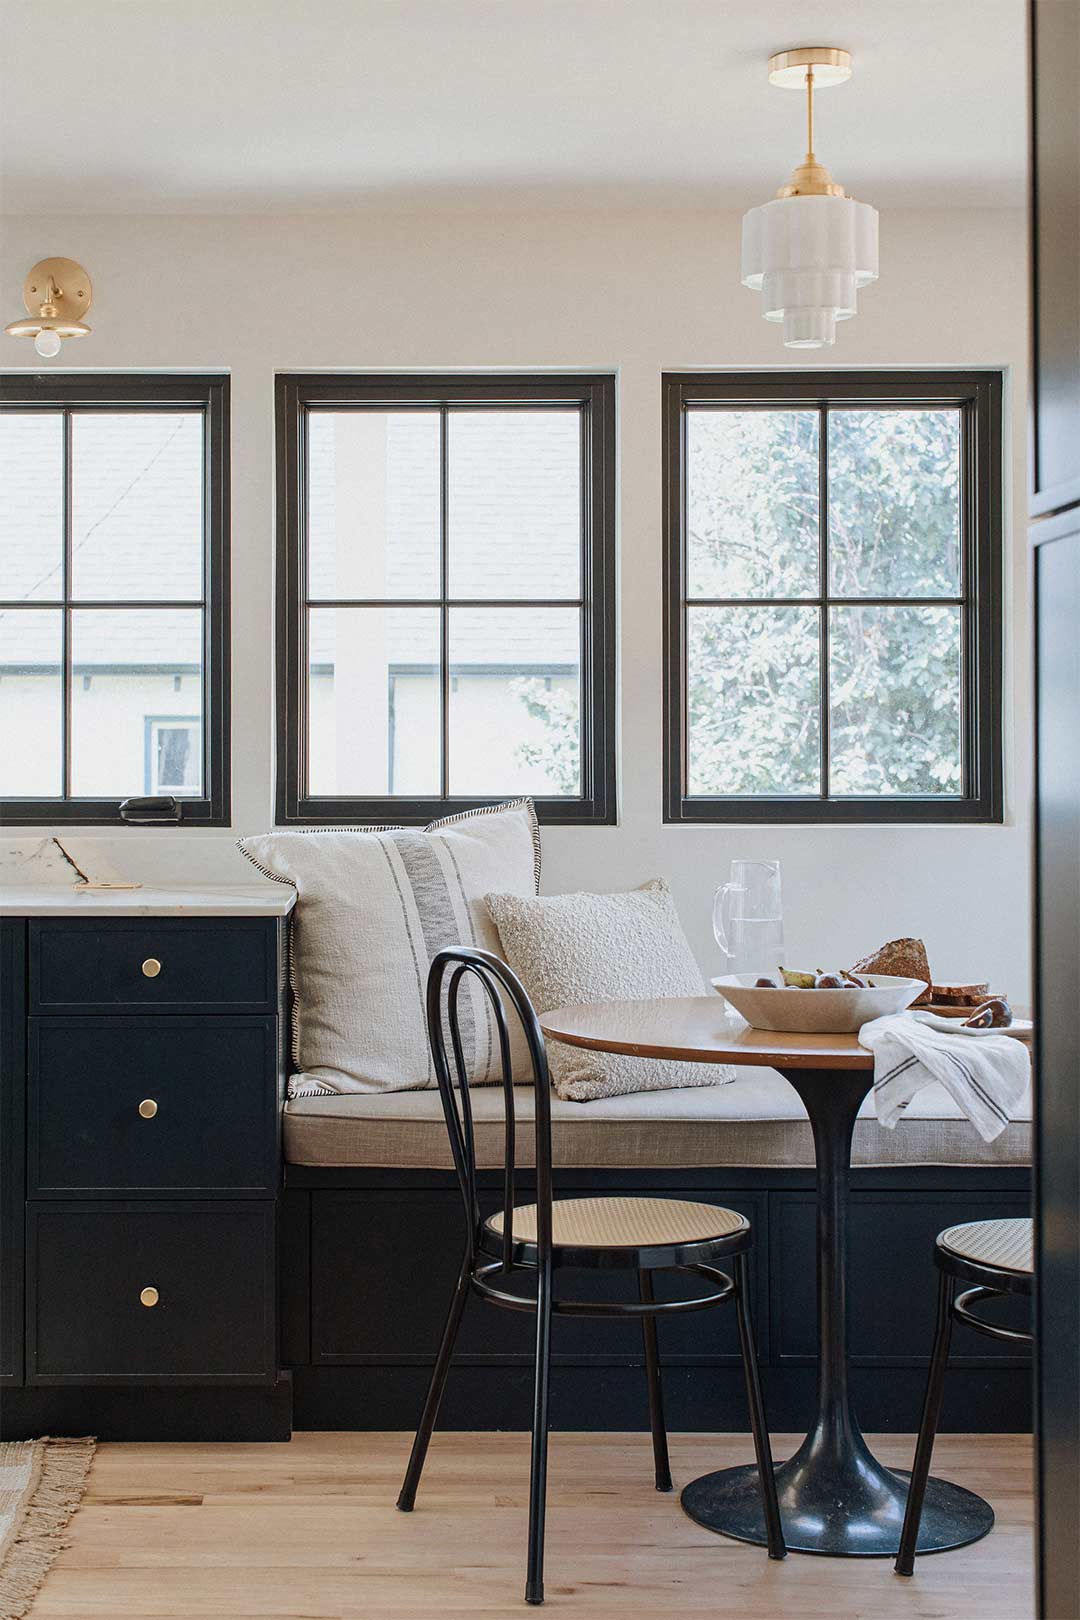 Historic remodel's dining nook with a dark blue bench seat brass pendant light overhead and black cane chairs styled by Jennifer Murphy of J. Reiko Design + Co